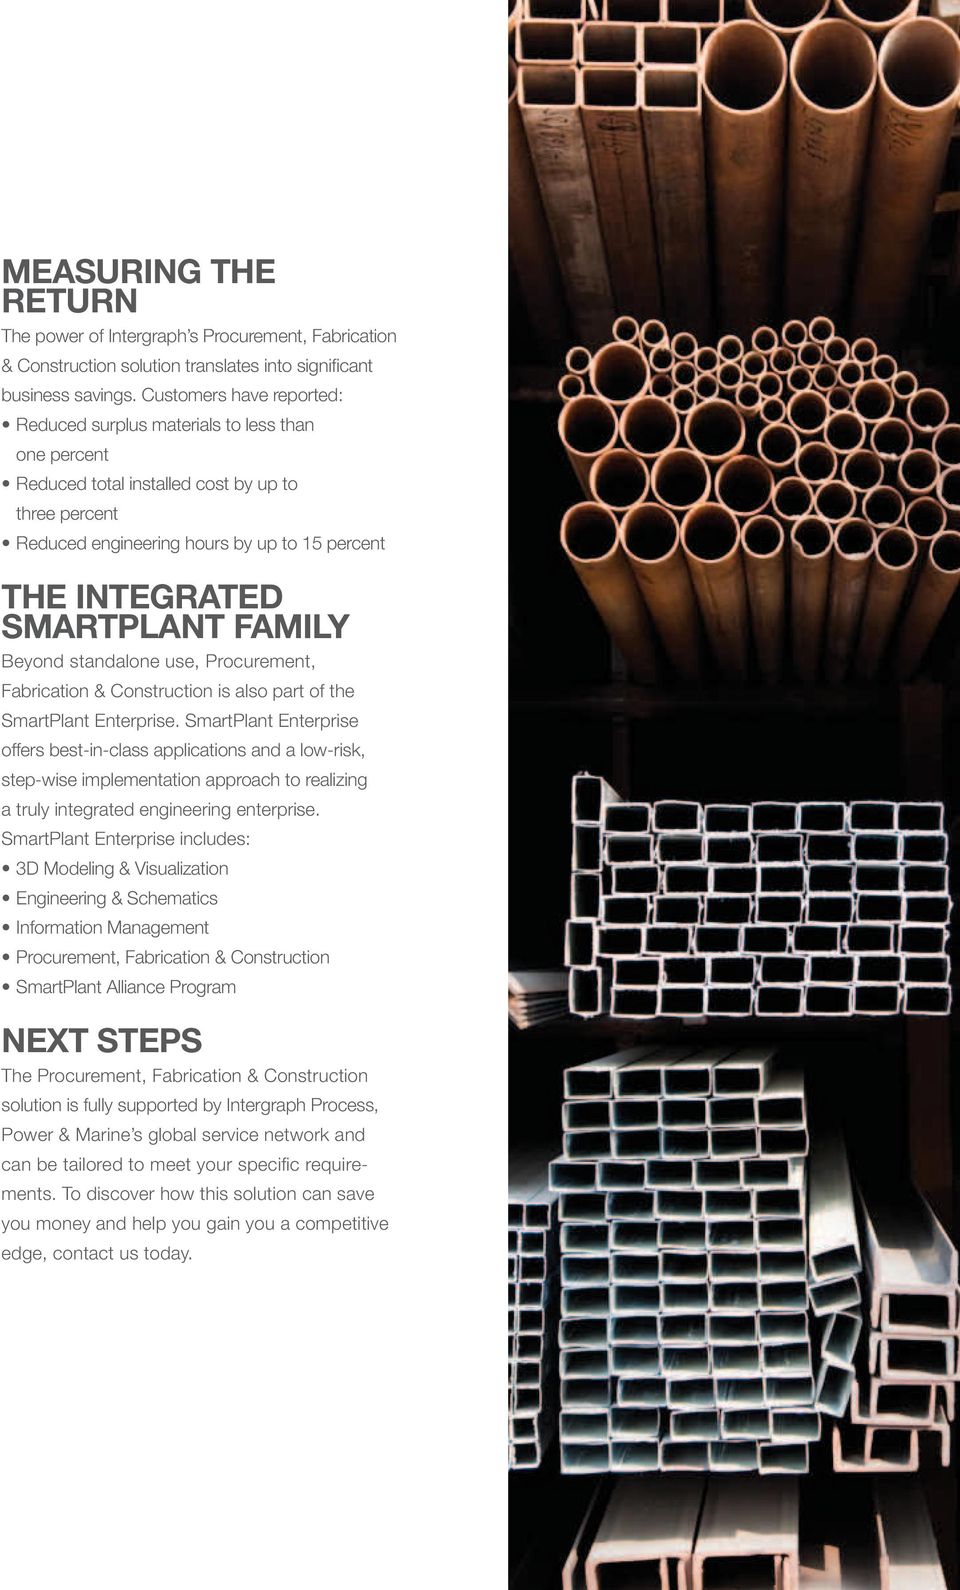 Family Beyond standalone use, Procurement, Fabrication & Construction is also part of the SmartPlant Enterprise.